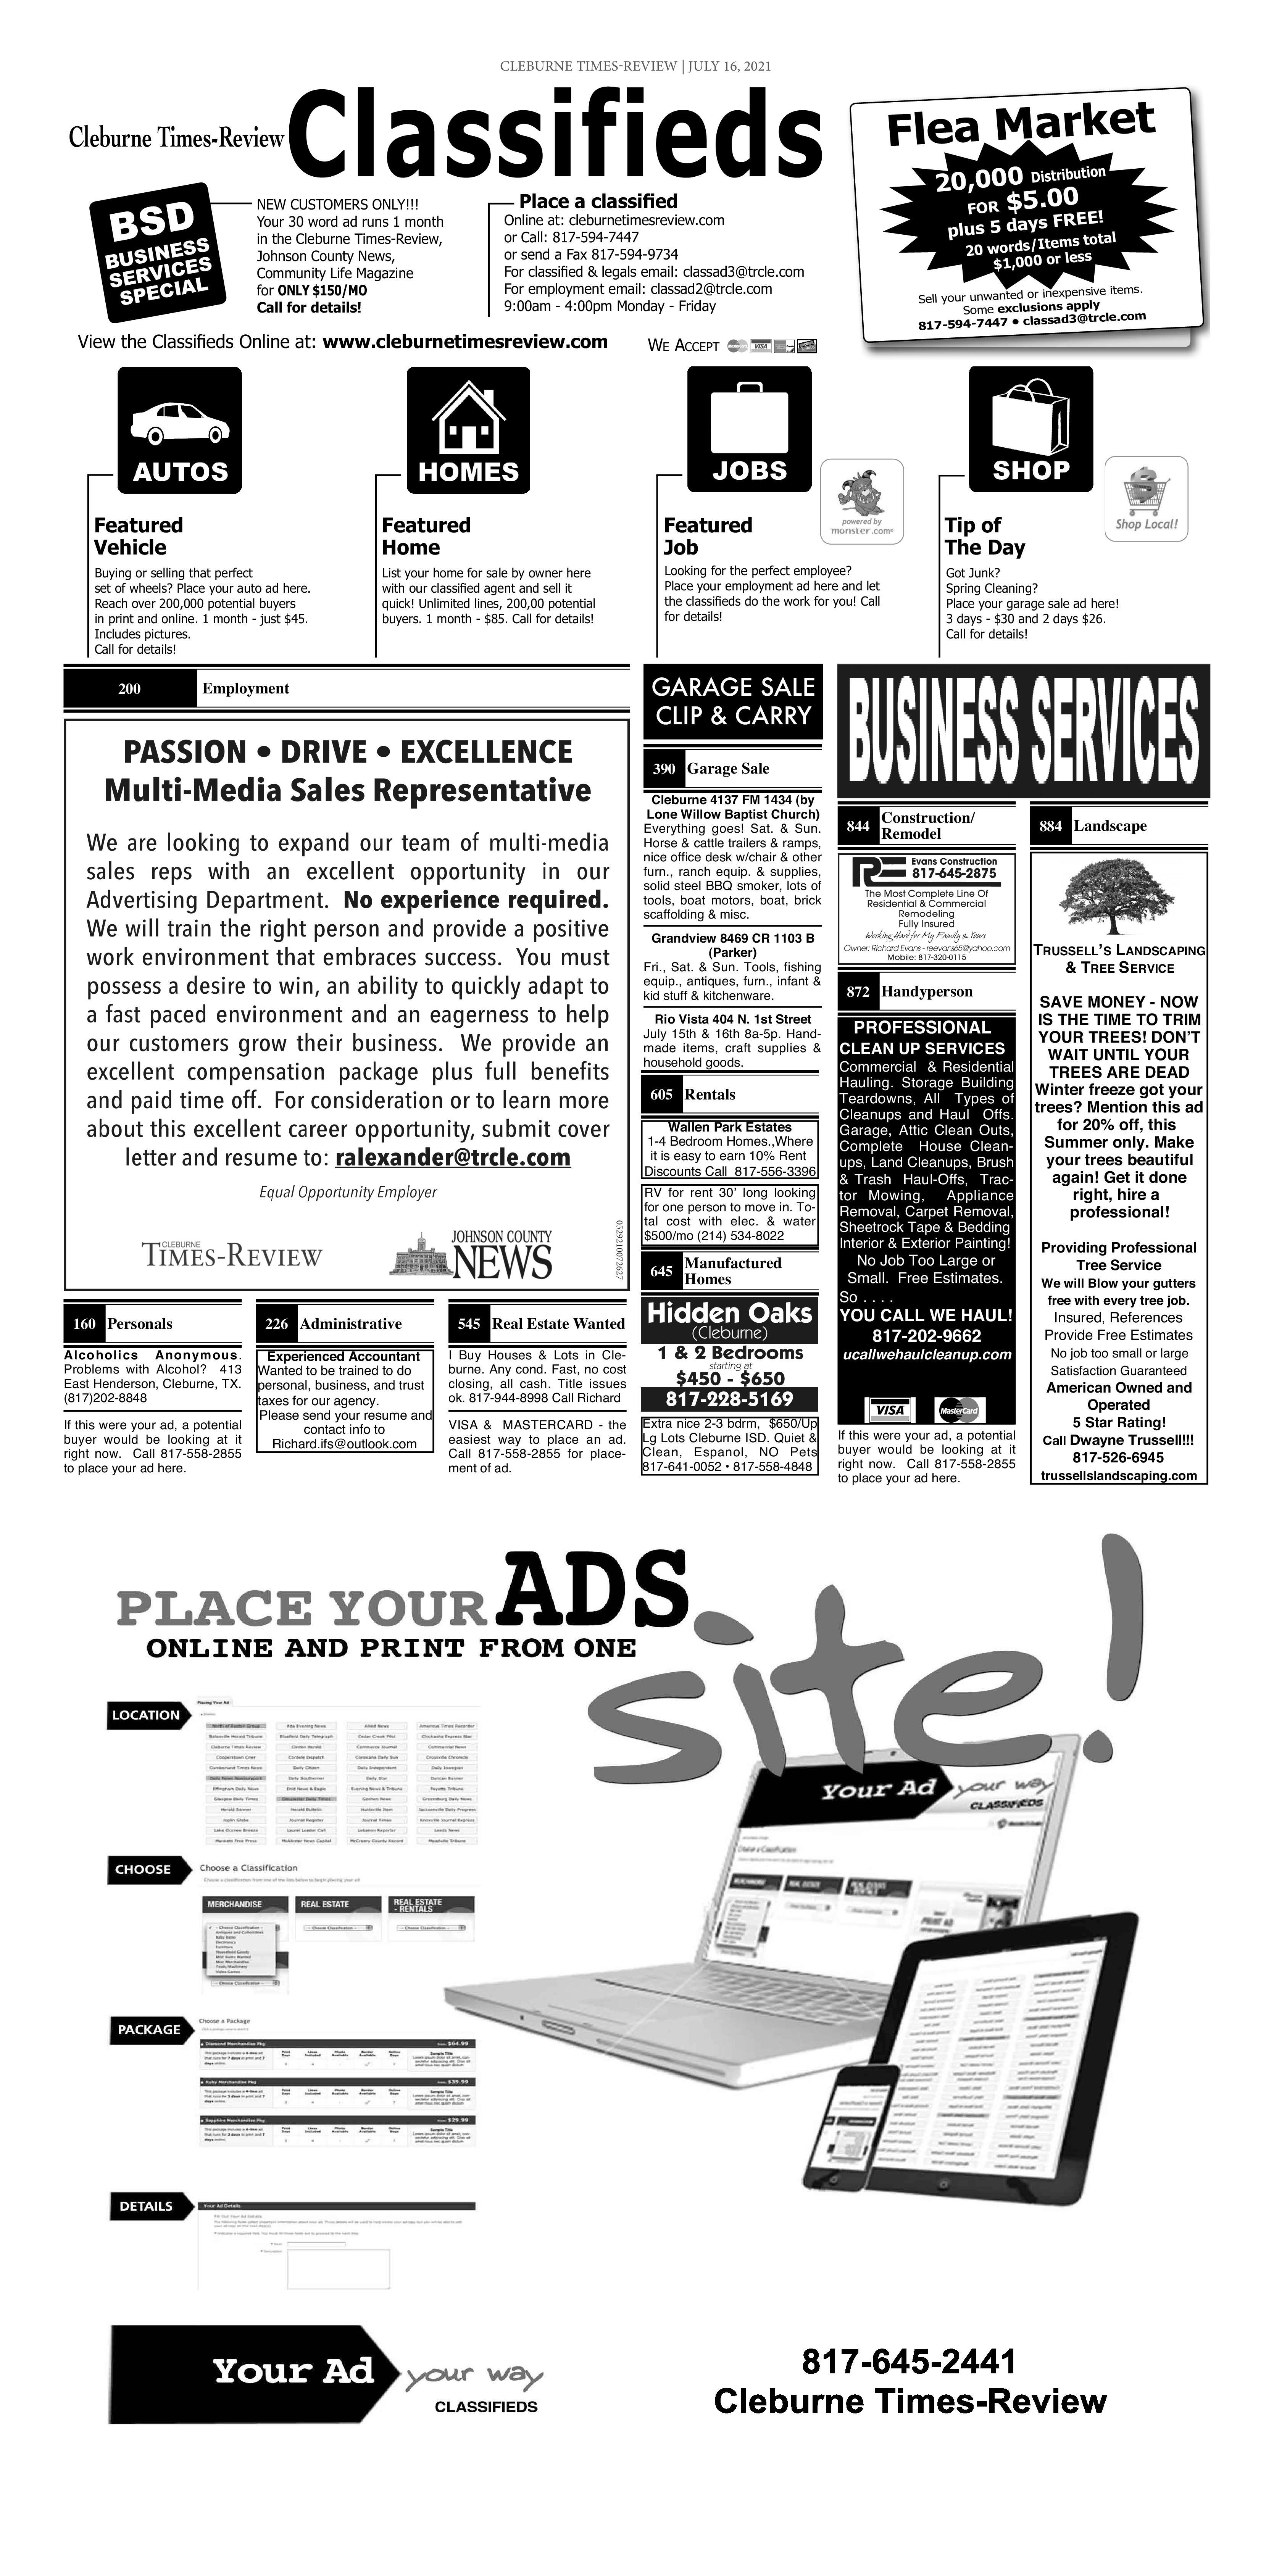 Cleburne Times Review Newspaper Ads Classifieds Employment Cleburne Times Review Classifieds [ 6750 x 3338 Pixel ]